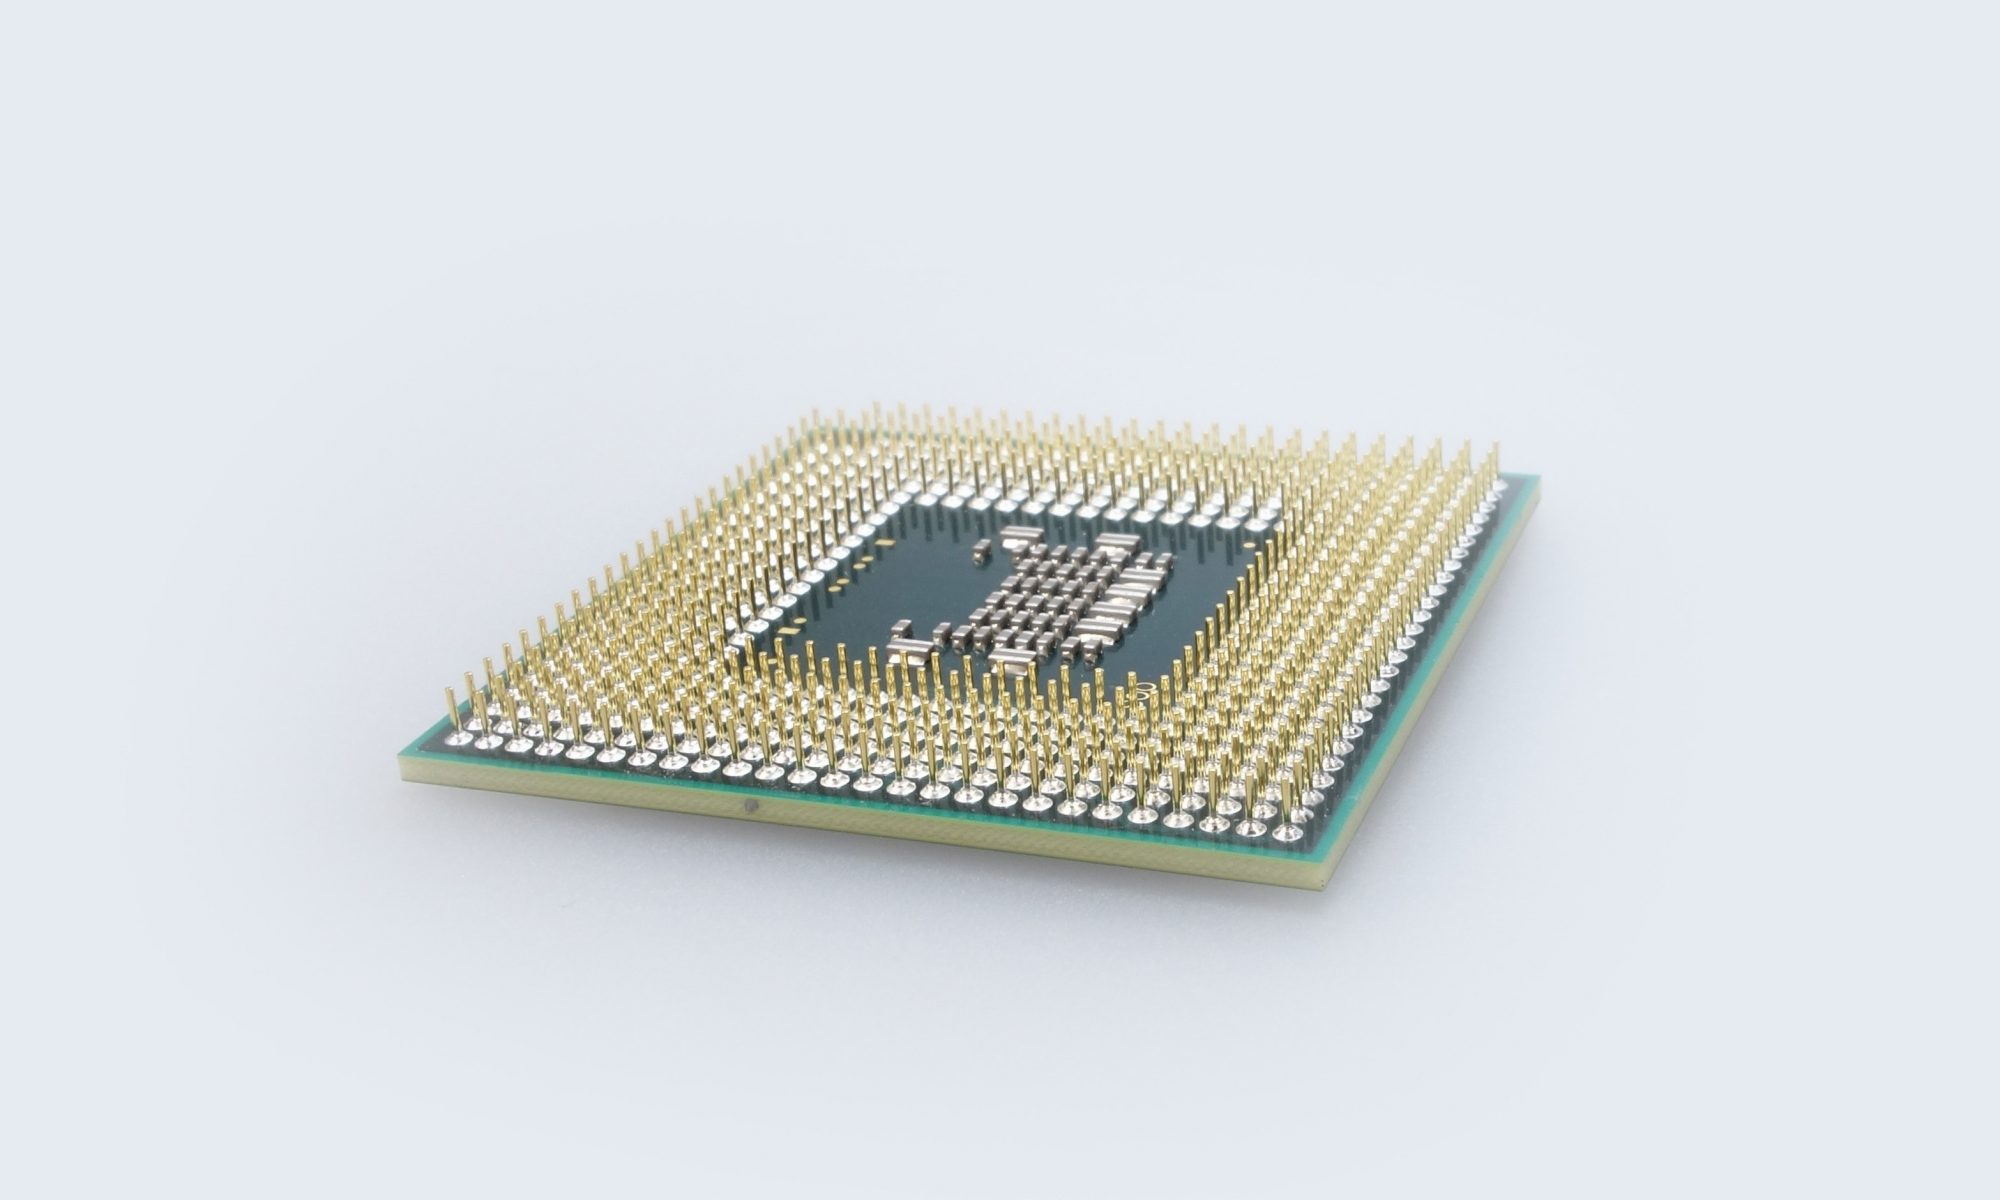 Closeup of a central processing unit chip for a computer